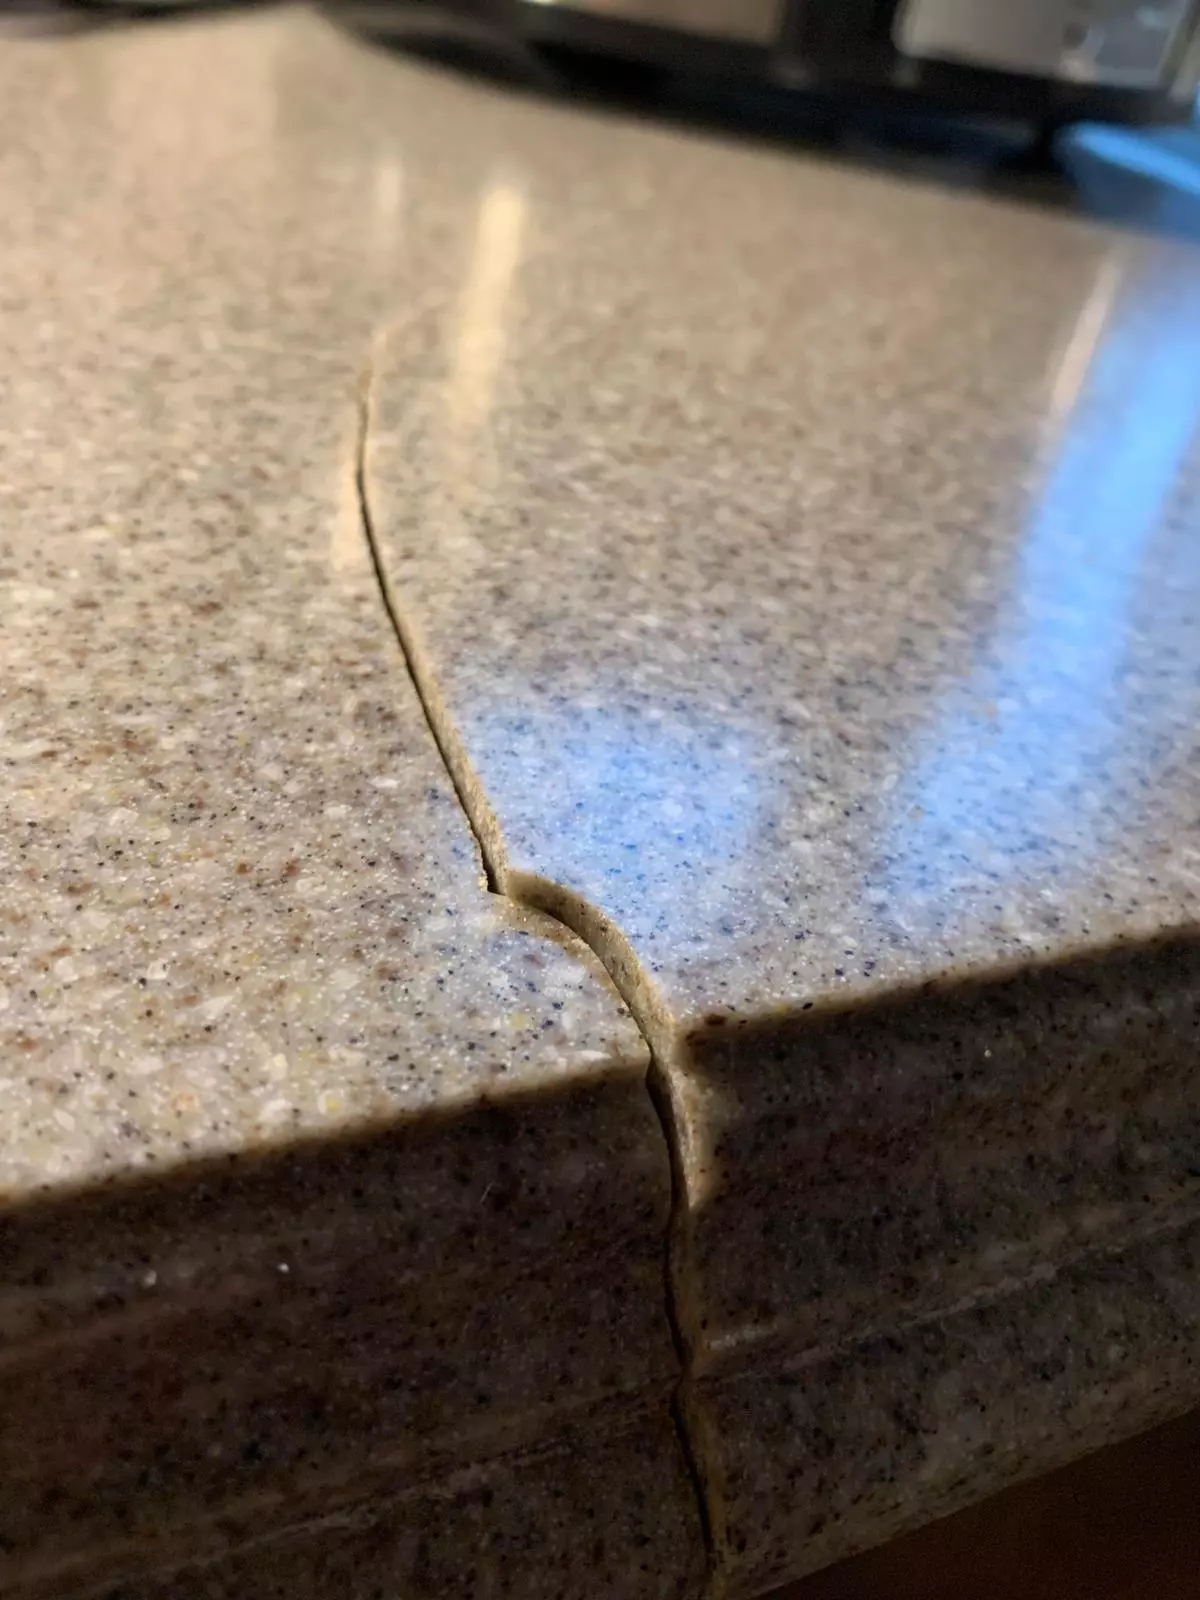 Dealing with a Crack in Your Countertop